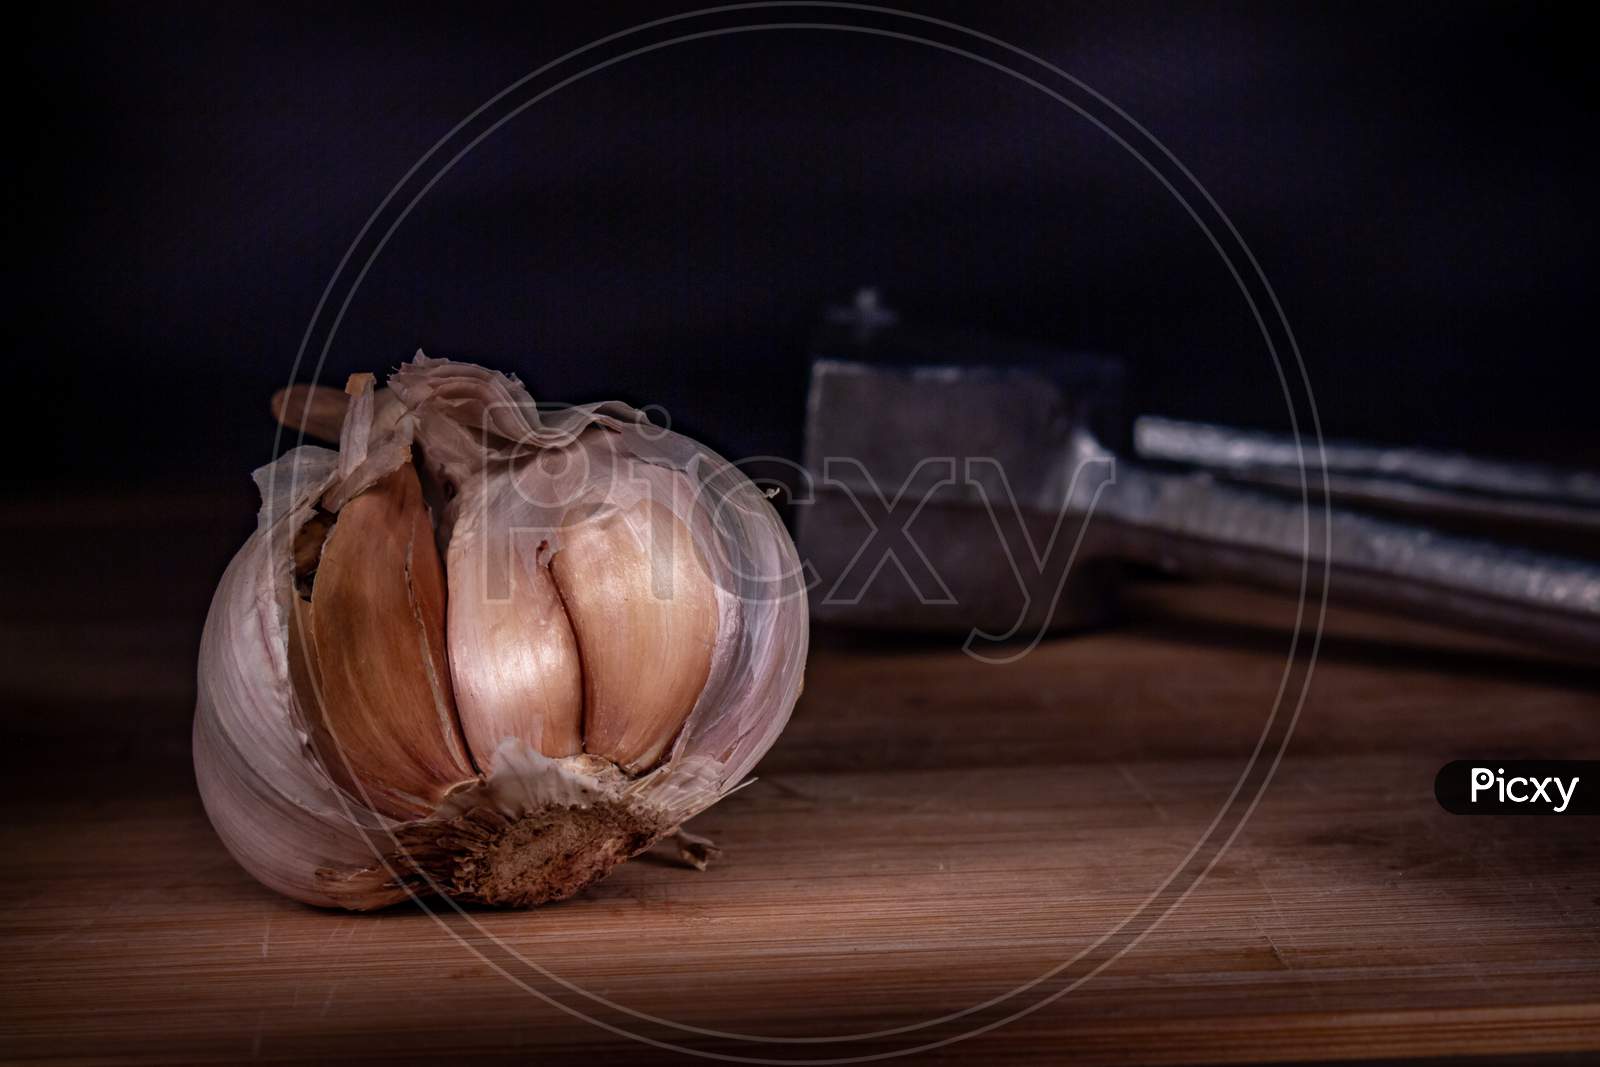 Garlic Head On A Wooden Board. Black Background With Free Space To Write.